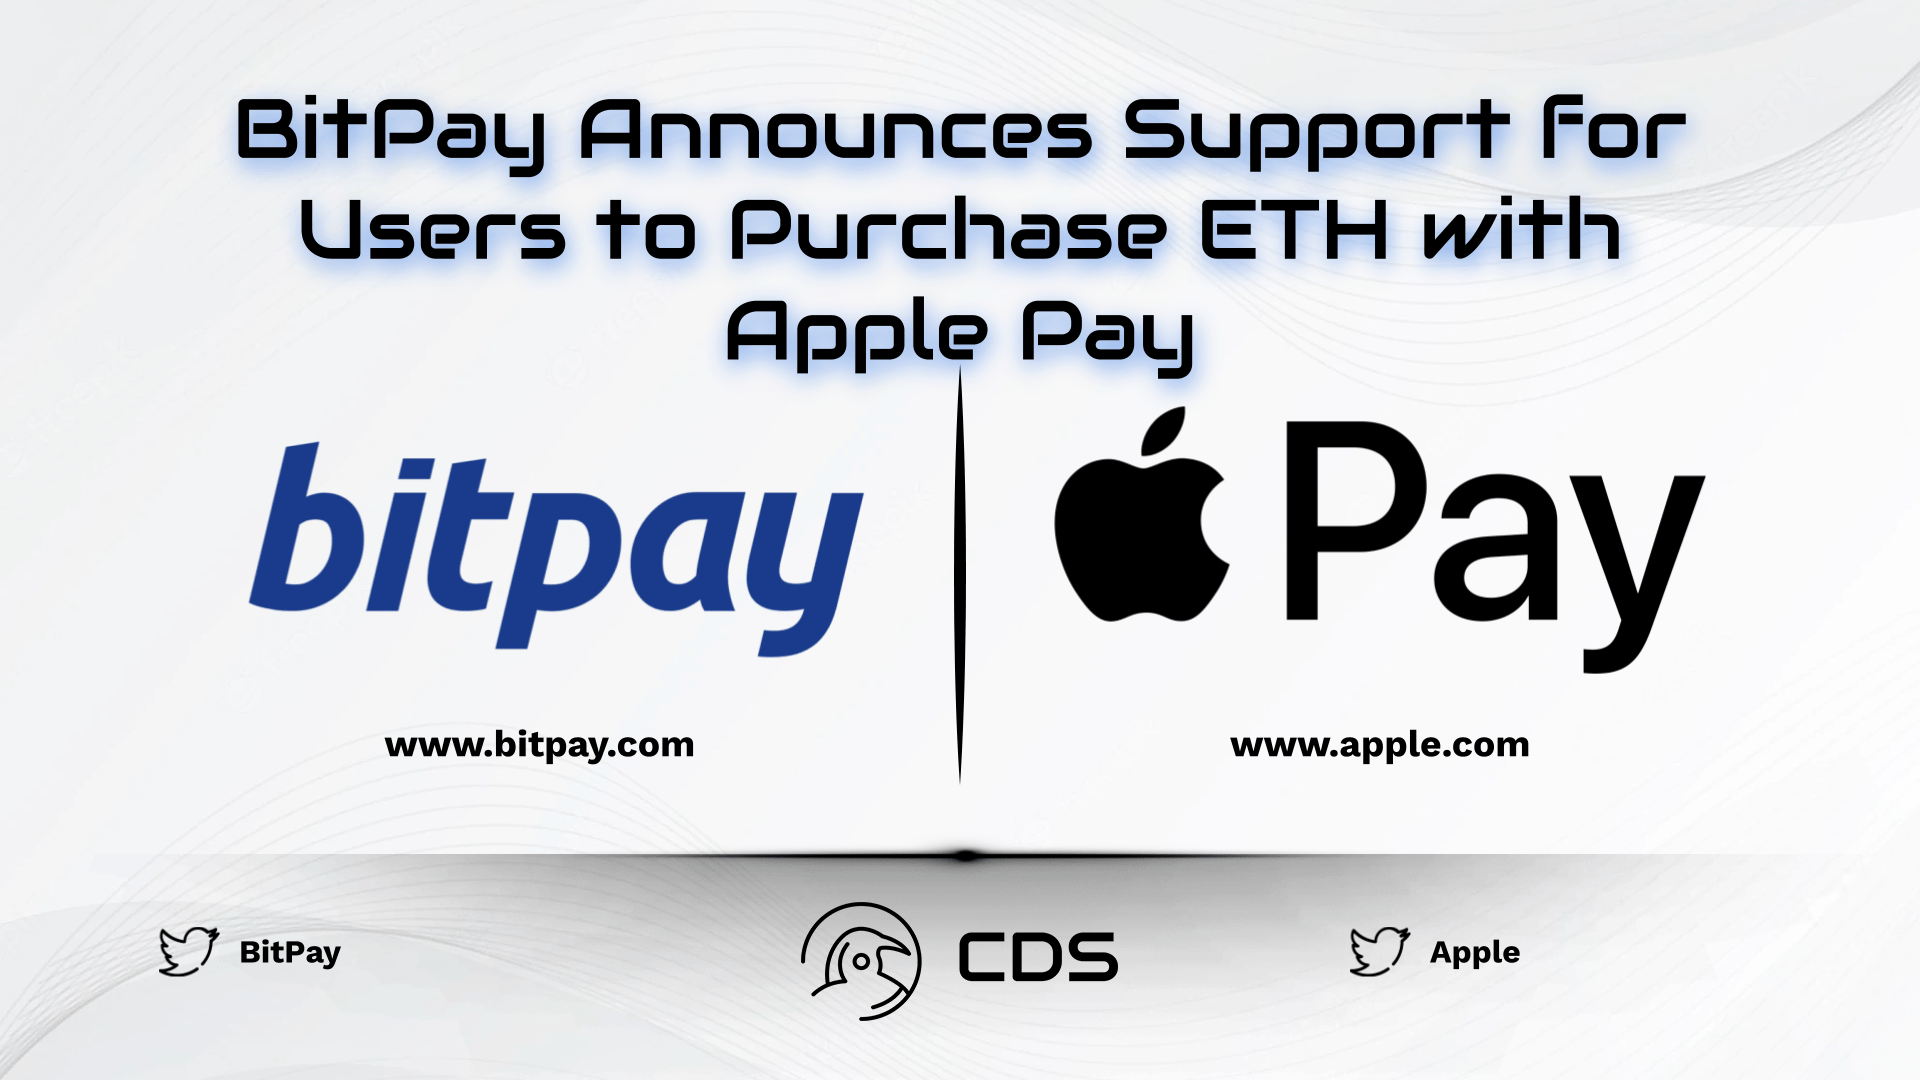 BitPay Announces Support for Users to Purchase ETH with Apple Pay